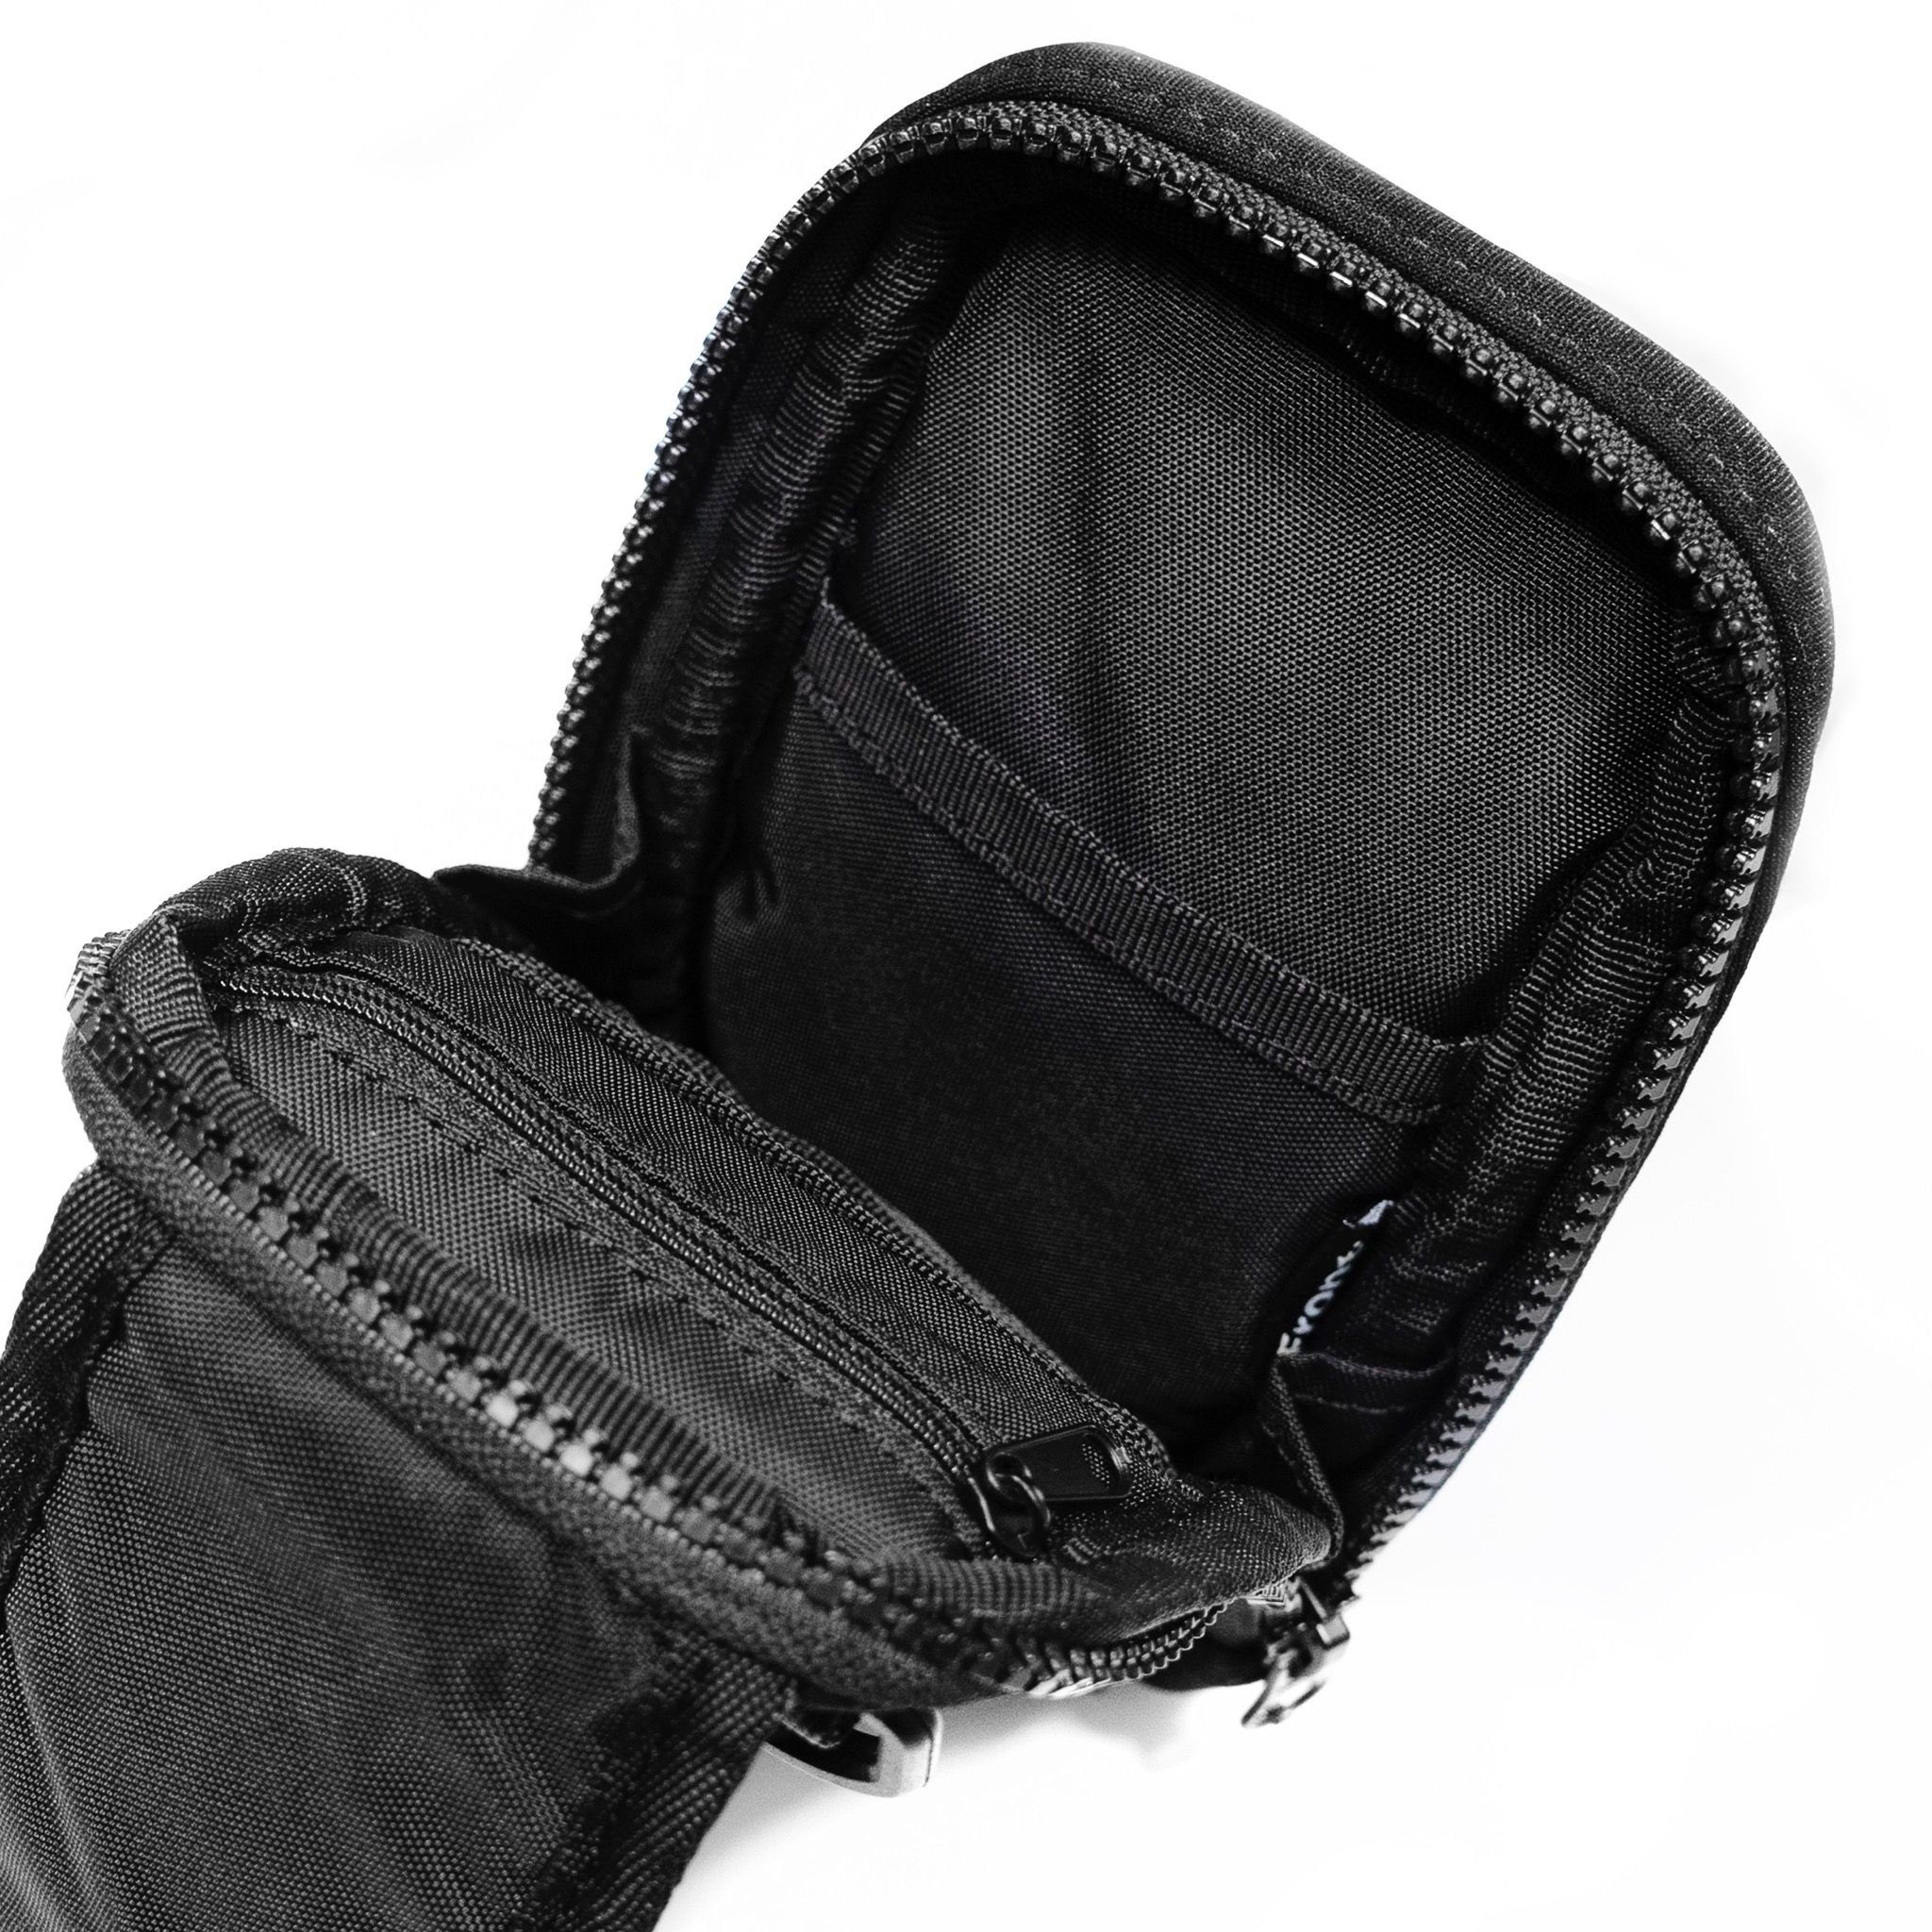  FRONT The Rook Mobile Pouch D421 - Black 